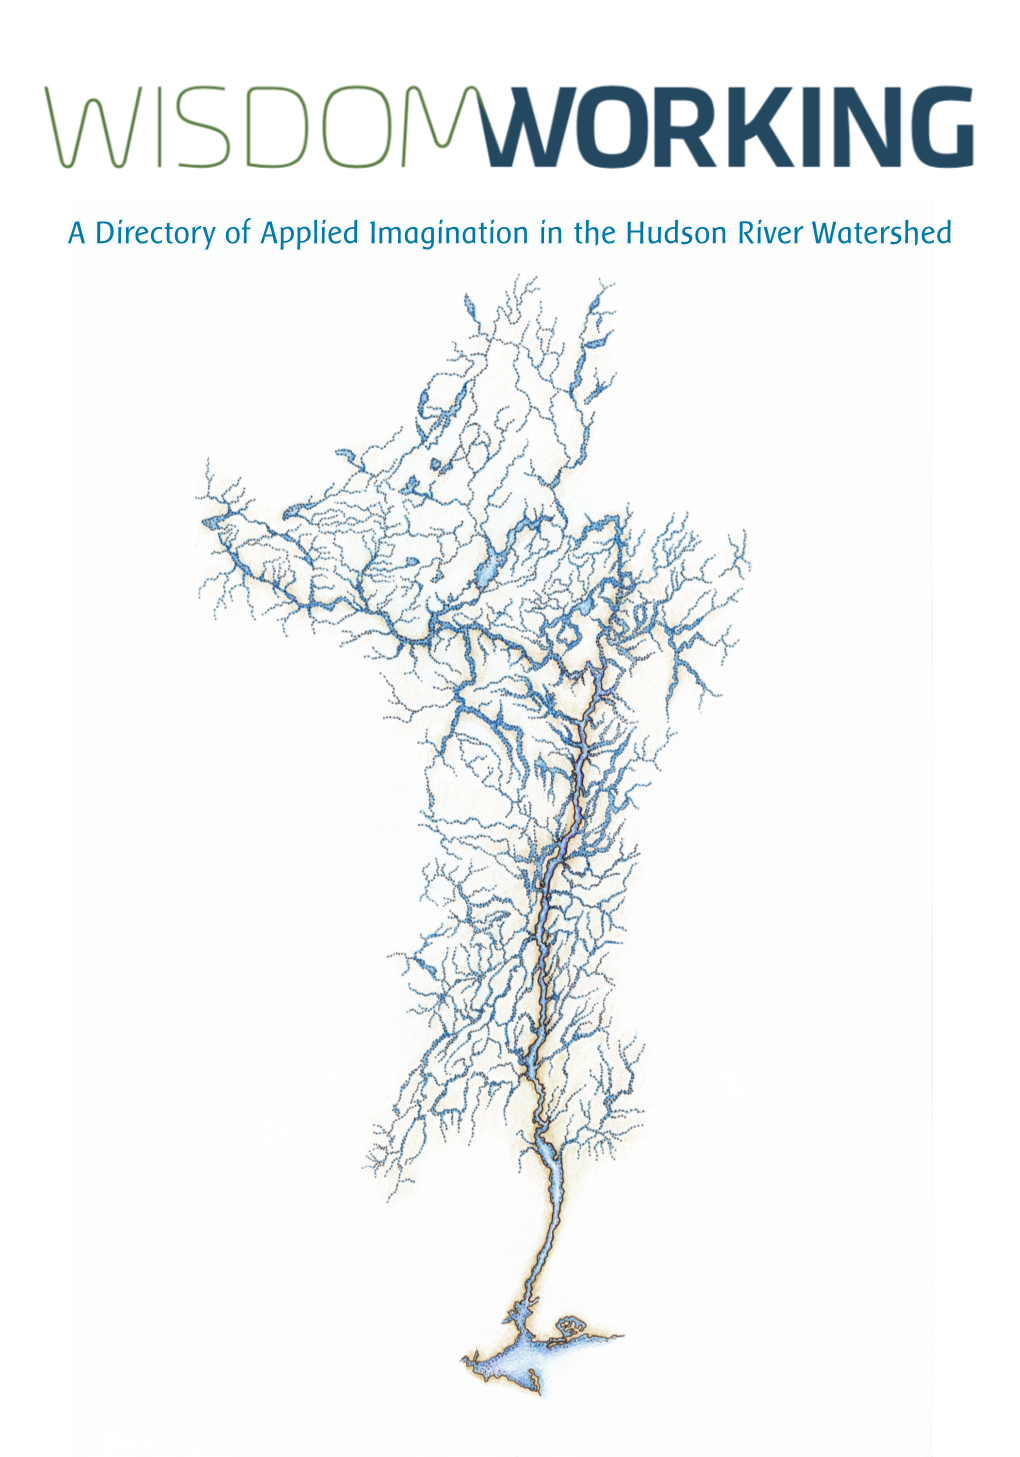 A Directory of Applied Imagination in the Hudson River Watershed